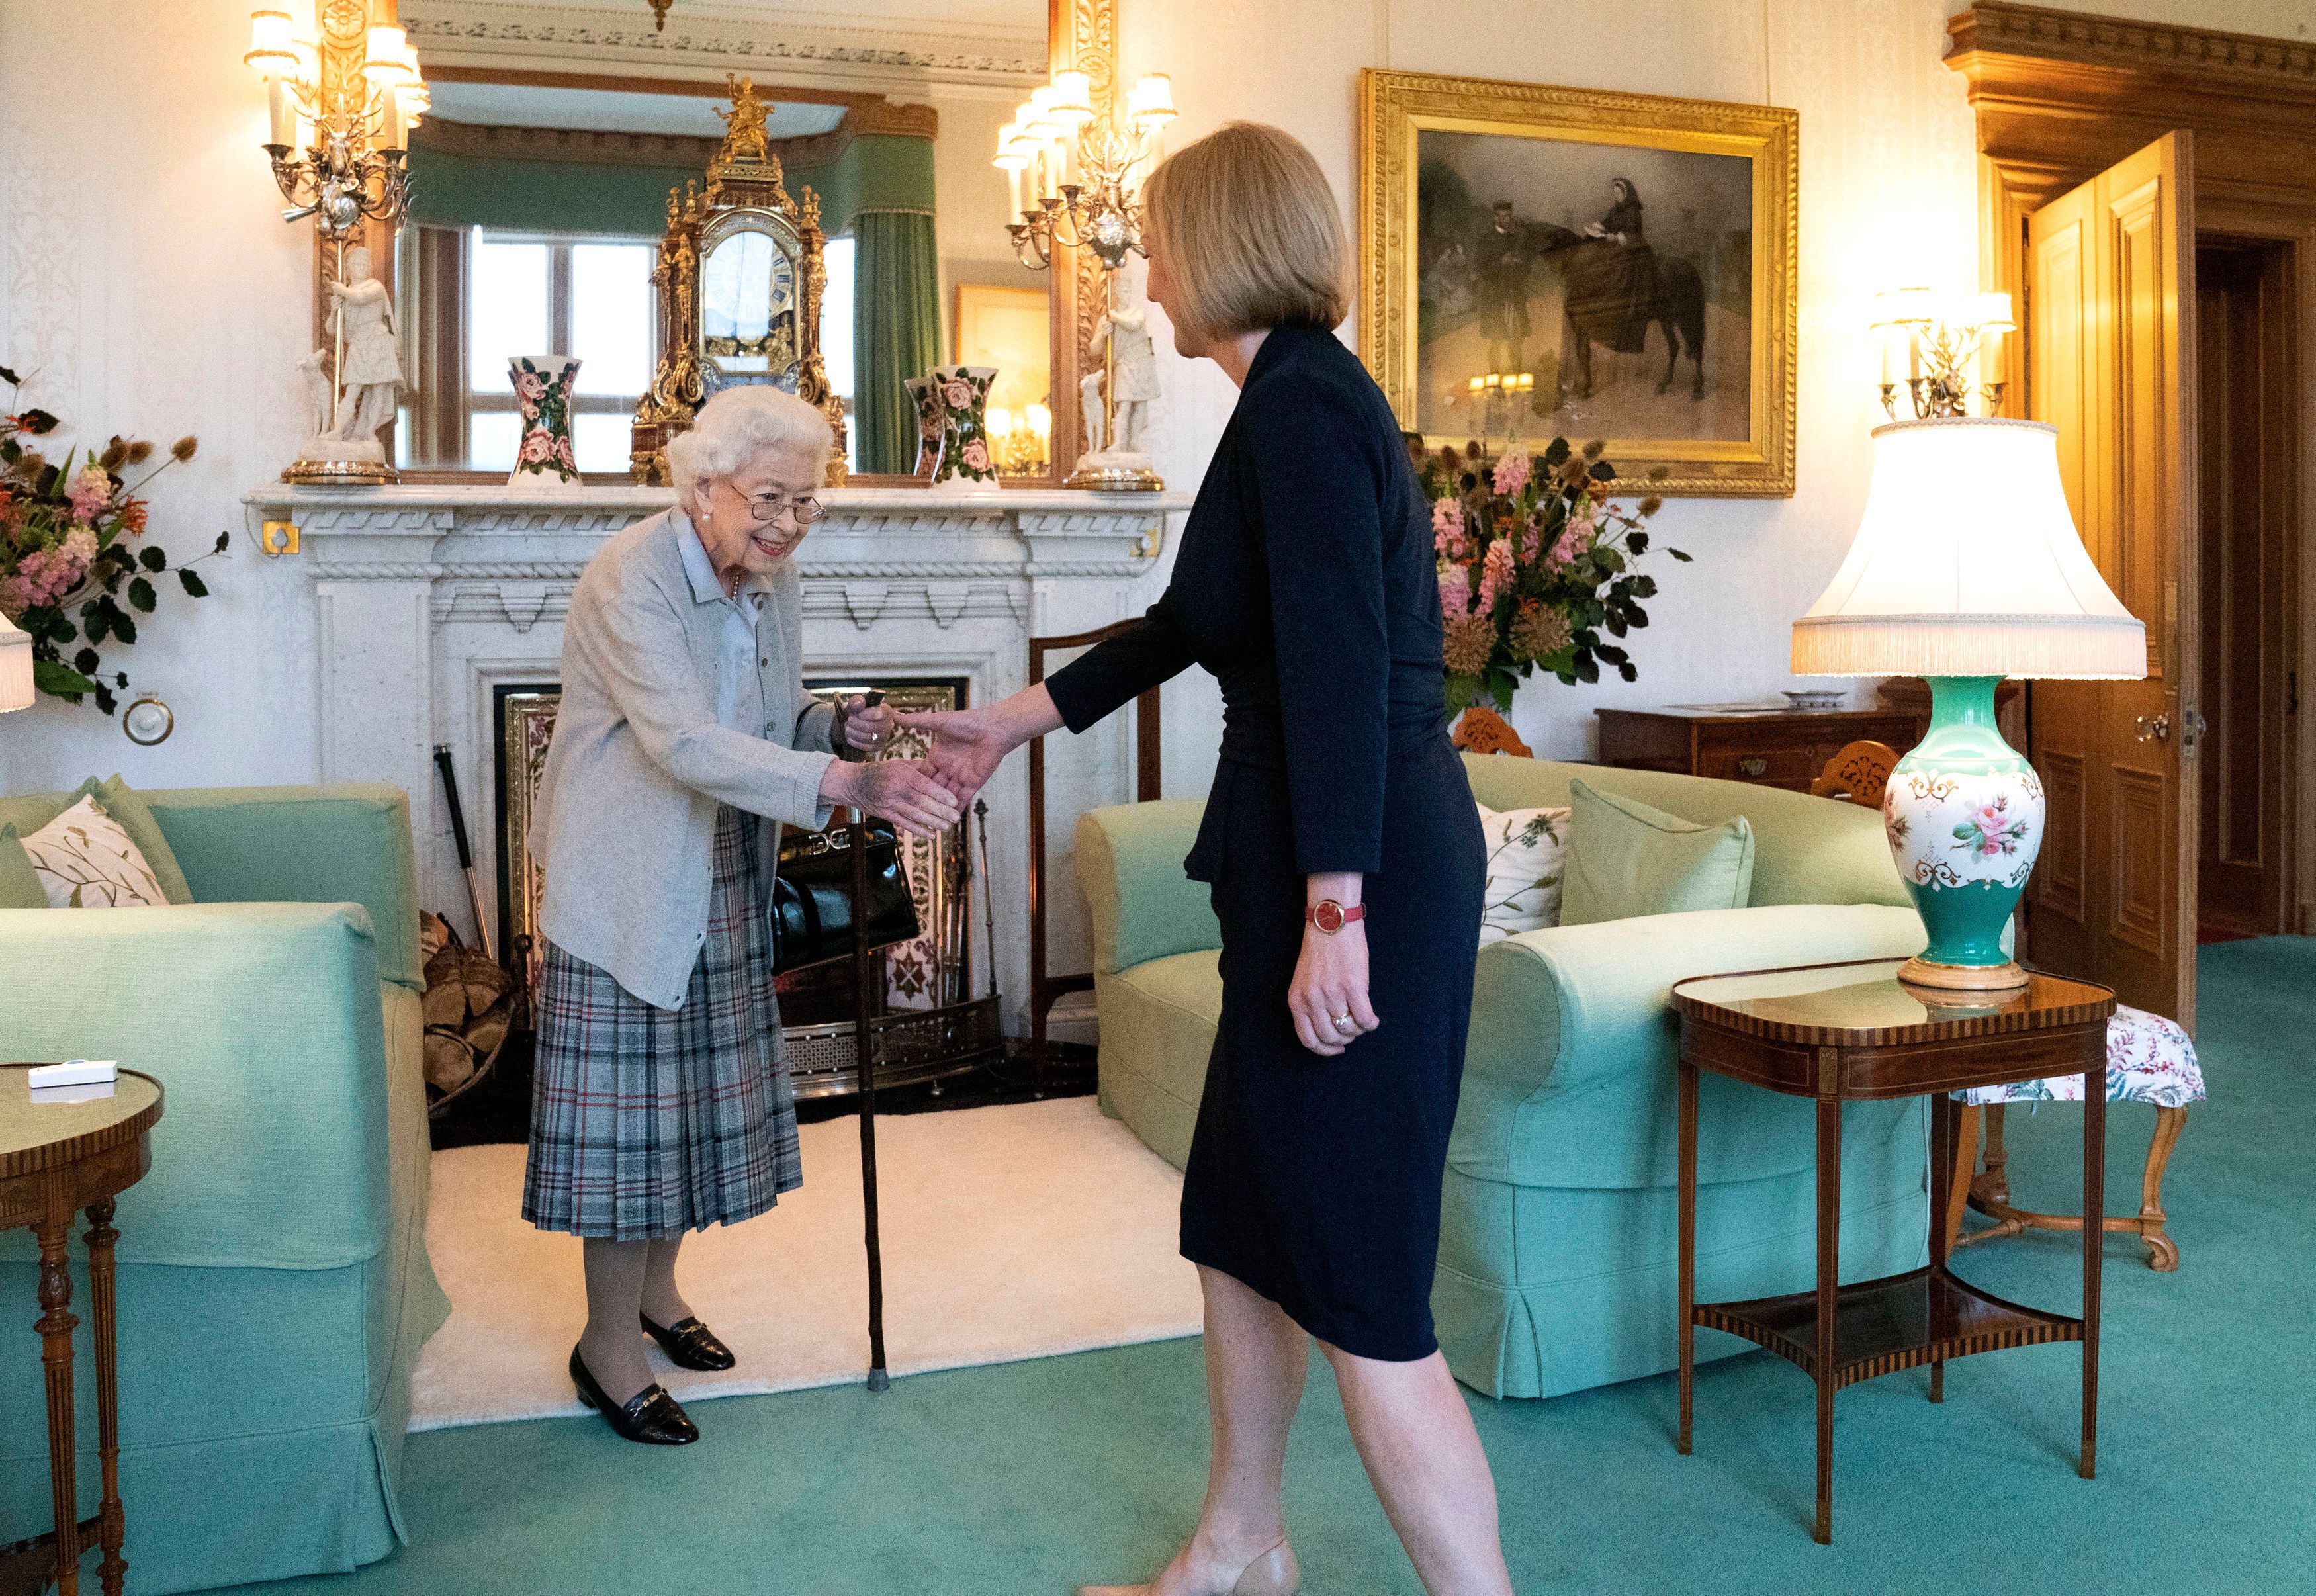 <p>In a royal first, Queen Elizabeth II welcomed Liz Truss to her home in the Scottish Highlands, Balmoral, where she invited the newly elected leader of the Conservative party to become prime minister, replacing Boris Johnson, and form a new government on Sept. 6, 2022. The meeting <a href="https://www.wonderwall.com/celebrity/photos/best-photos-royal-family-scotland-balmoral-castle-3020636.gallery?photoId=646606">marked the first time in the monarch's 70-year reign</a> that she did not appoint a new prime minister while in London but from her home in Scotland. The change was made because Her Majesty, who's long spent her summers in Scotland, was facing ongoing health issues so the decision was made to bring the politician -- the 15th prime minister she's had during her long reign -- to her. Just two days later, <a href="https://www.wonderwall.com/celebrity/celebrities-dignitaries-react-to-death-of-queen-elizabeth-ii-647756.gallery">she was dead at 96</a>.</p>